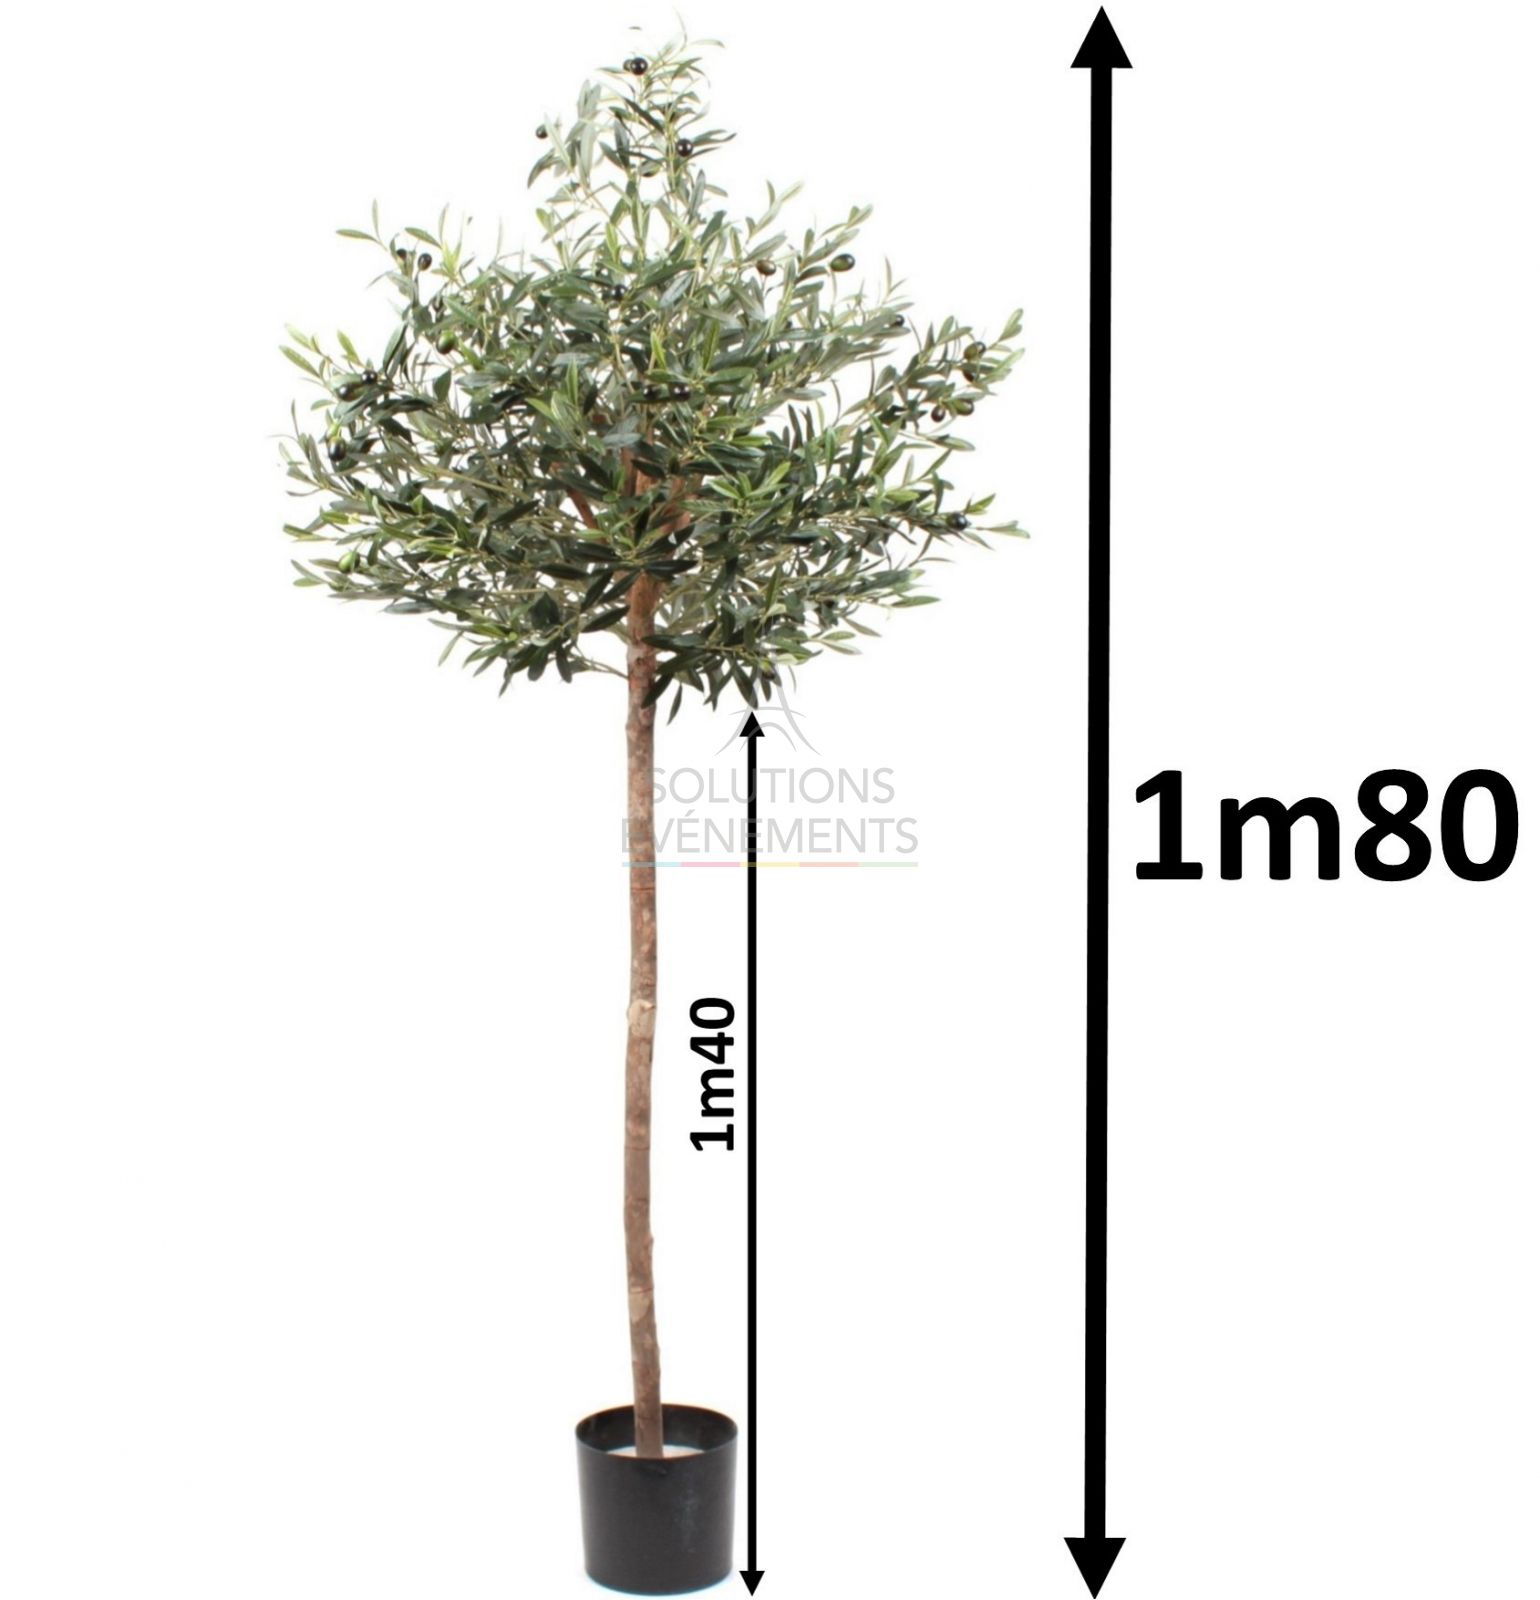 Rental of an artificial olive tree